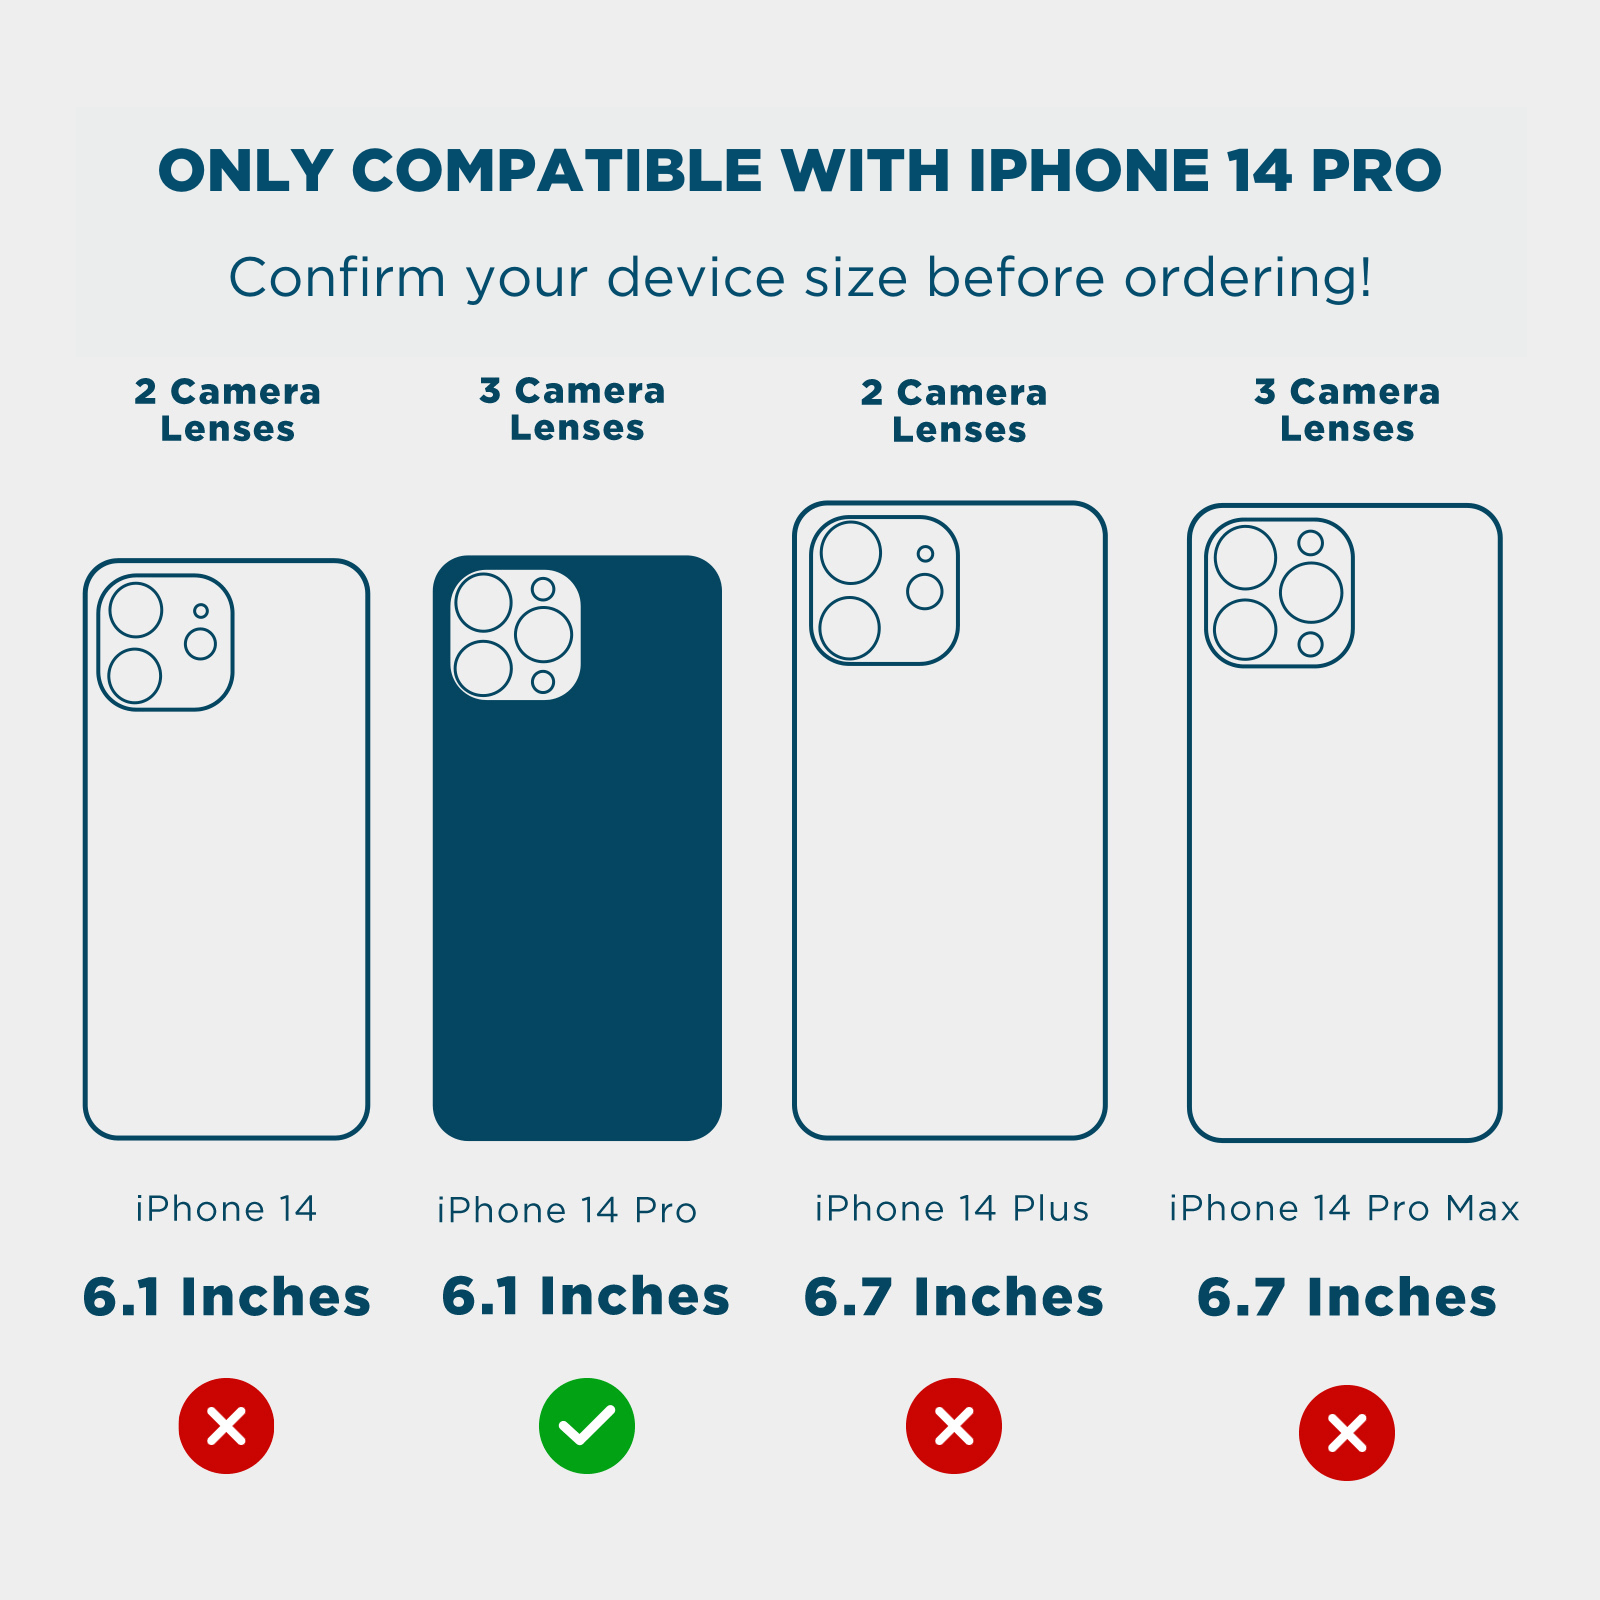 ONLY COMPATIBLE WITH IPHONE 14 PRO. CONFIRM YOUR DEVICE SIZE BEFORE ORDERING. 2 CAMERA LENSES, 3 CAMERA LENSES, 2 CAMERA LENSES, 3 CAMERA LENSES, 6.1, 6.1, 6.7, 6.7. COLOR::KARAT MARBLE